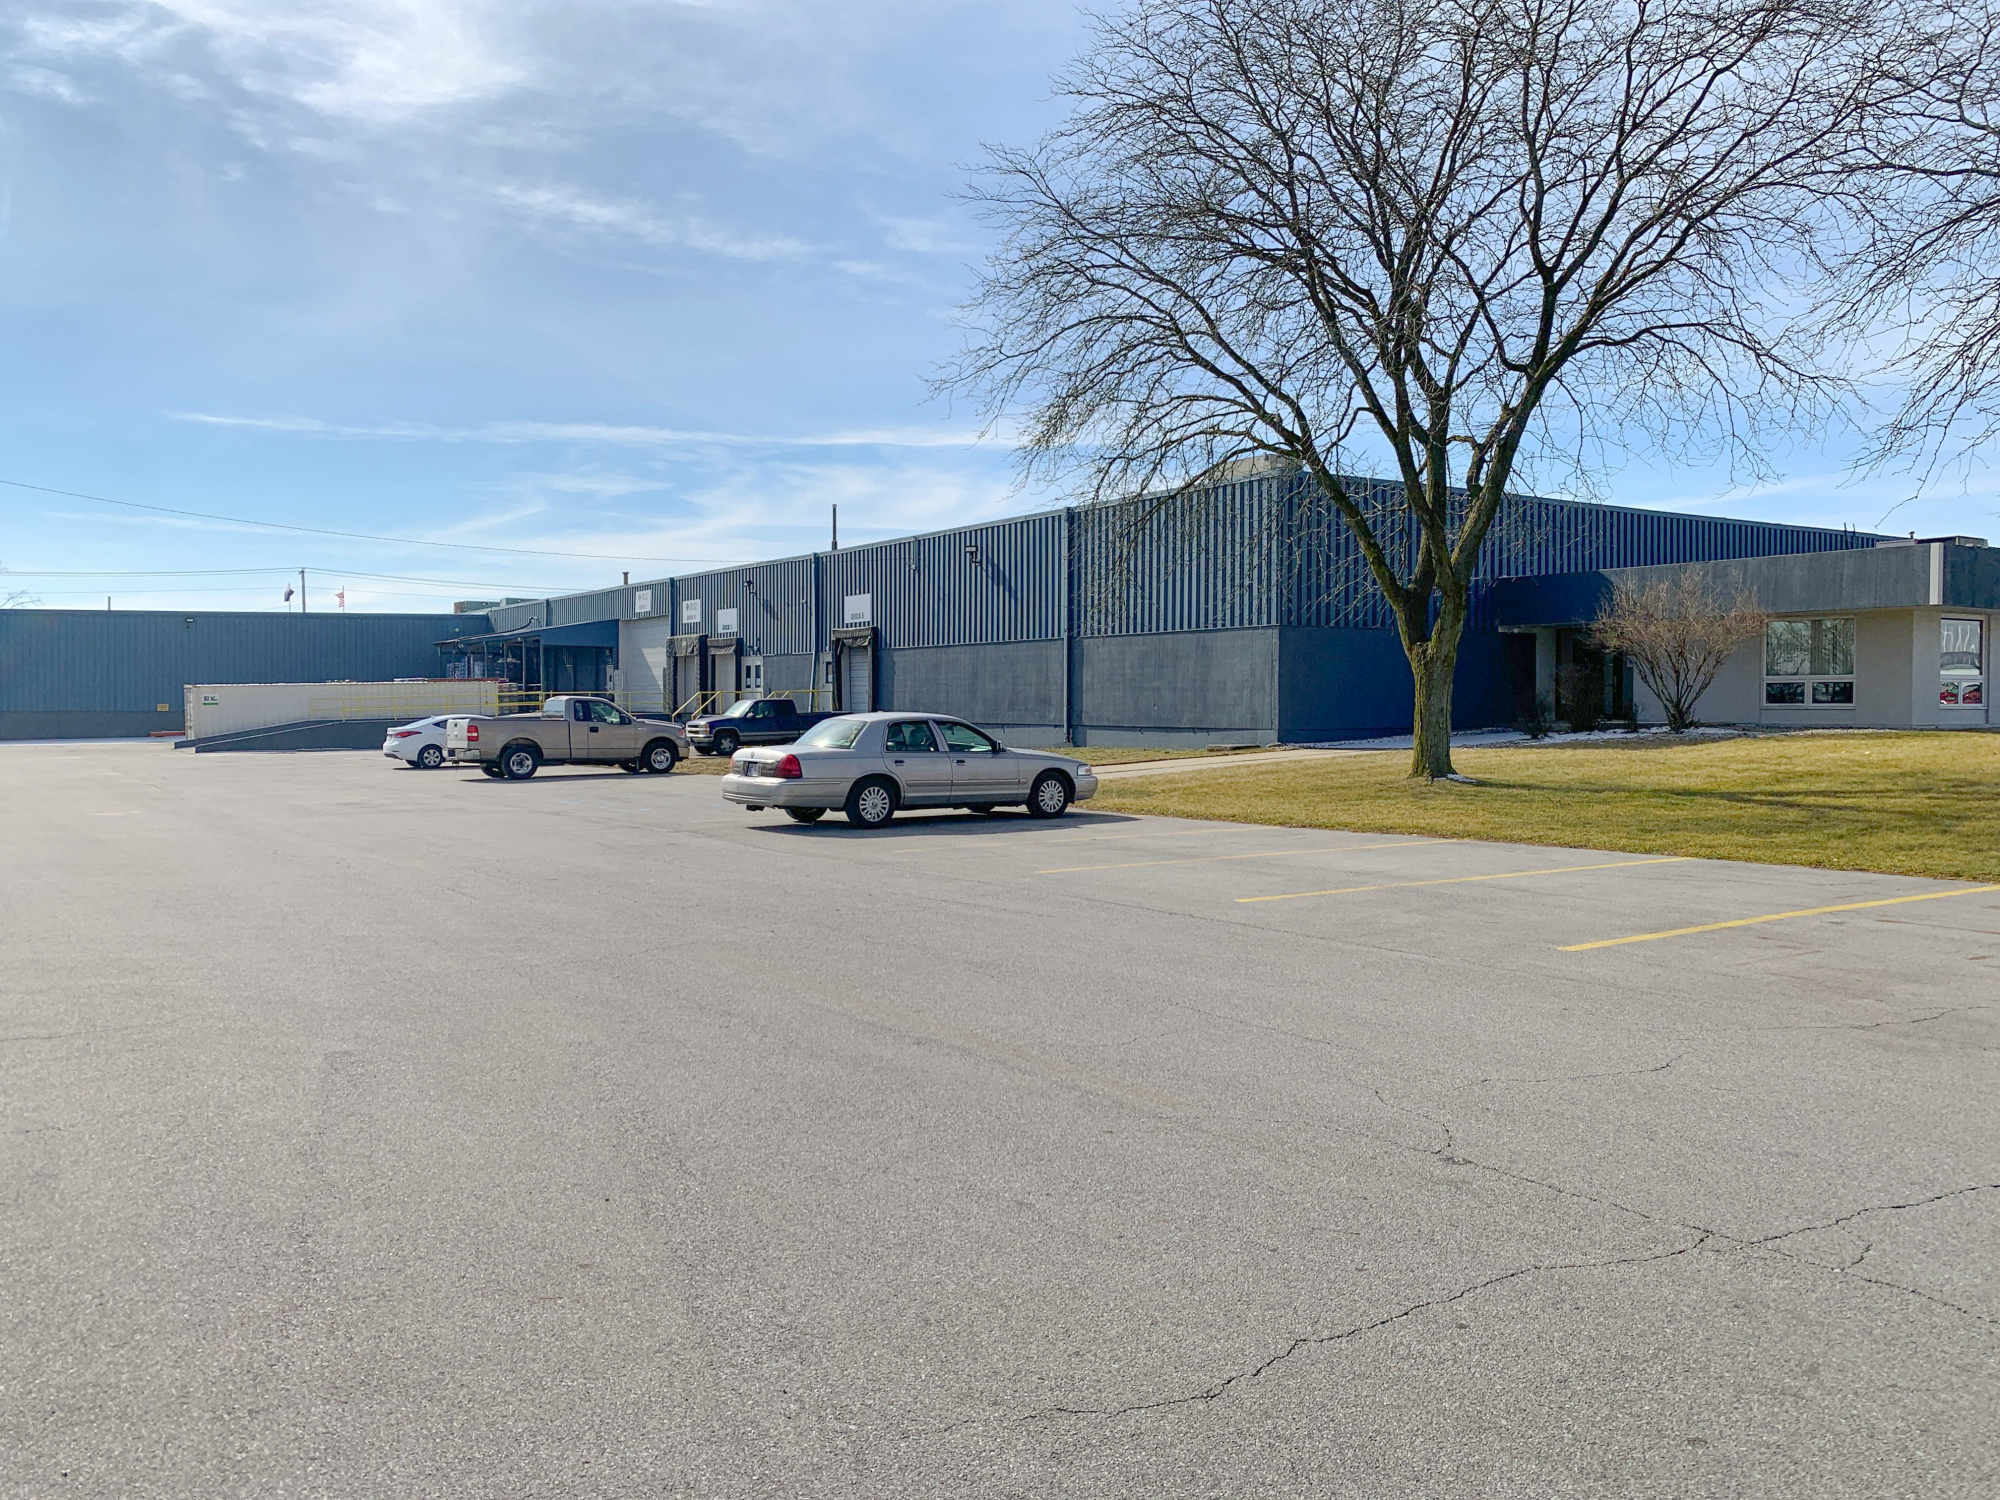 Sturges Property Group - Industrial Warehouse For Sublease In Fort Wayne Near I-69